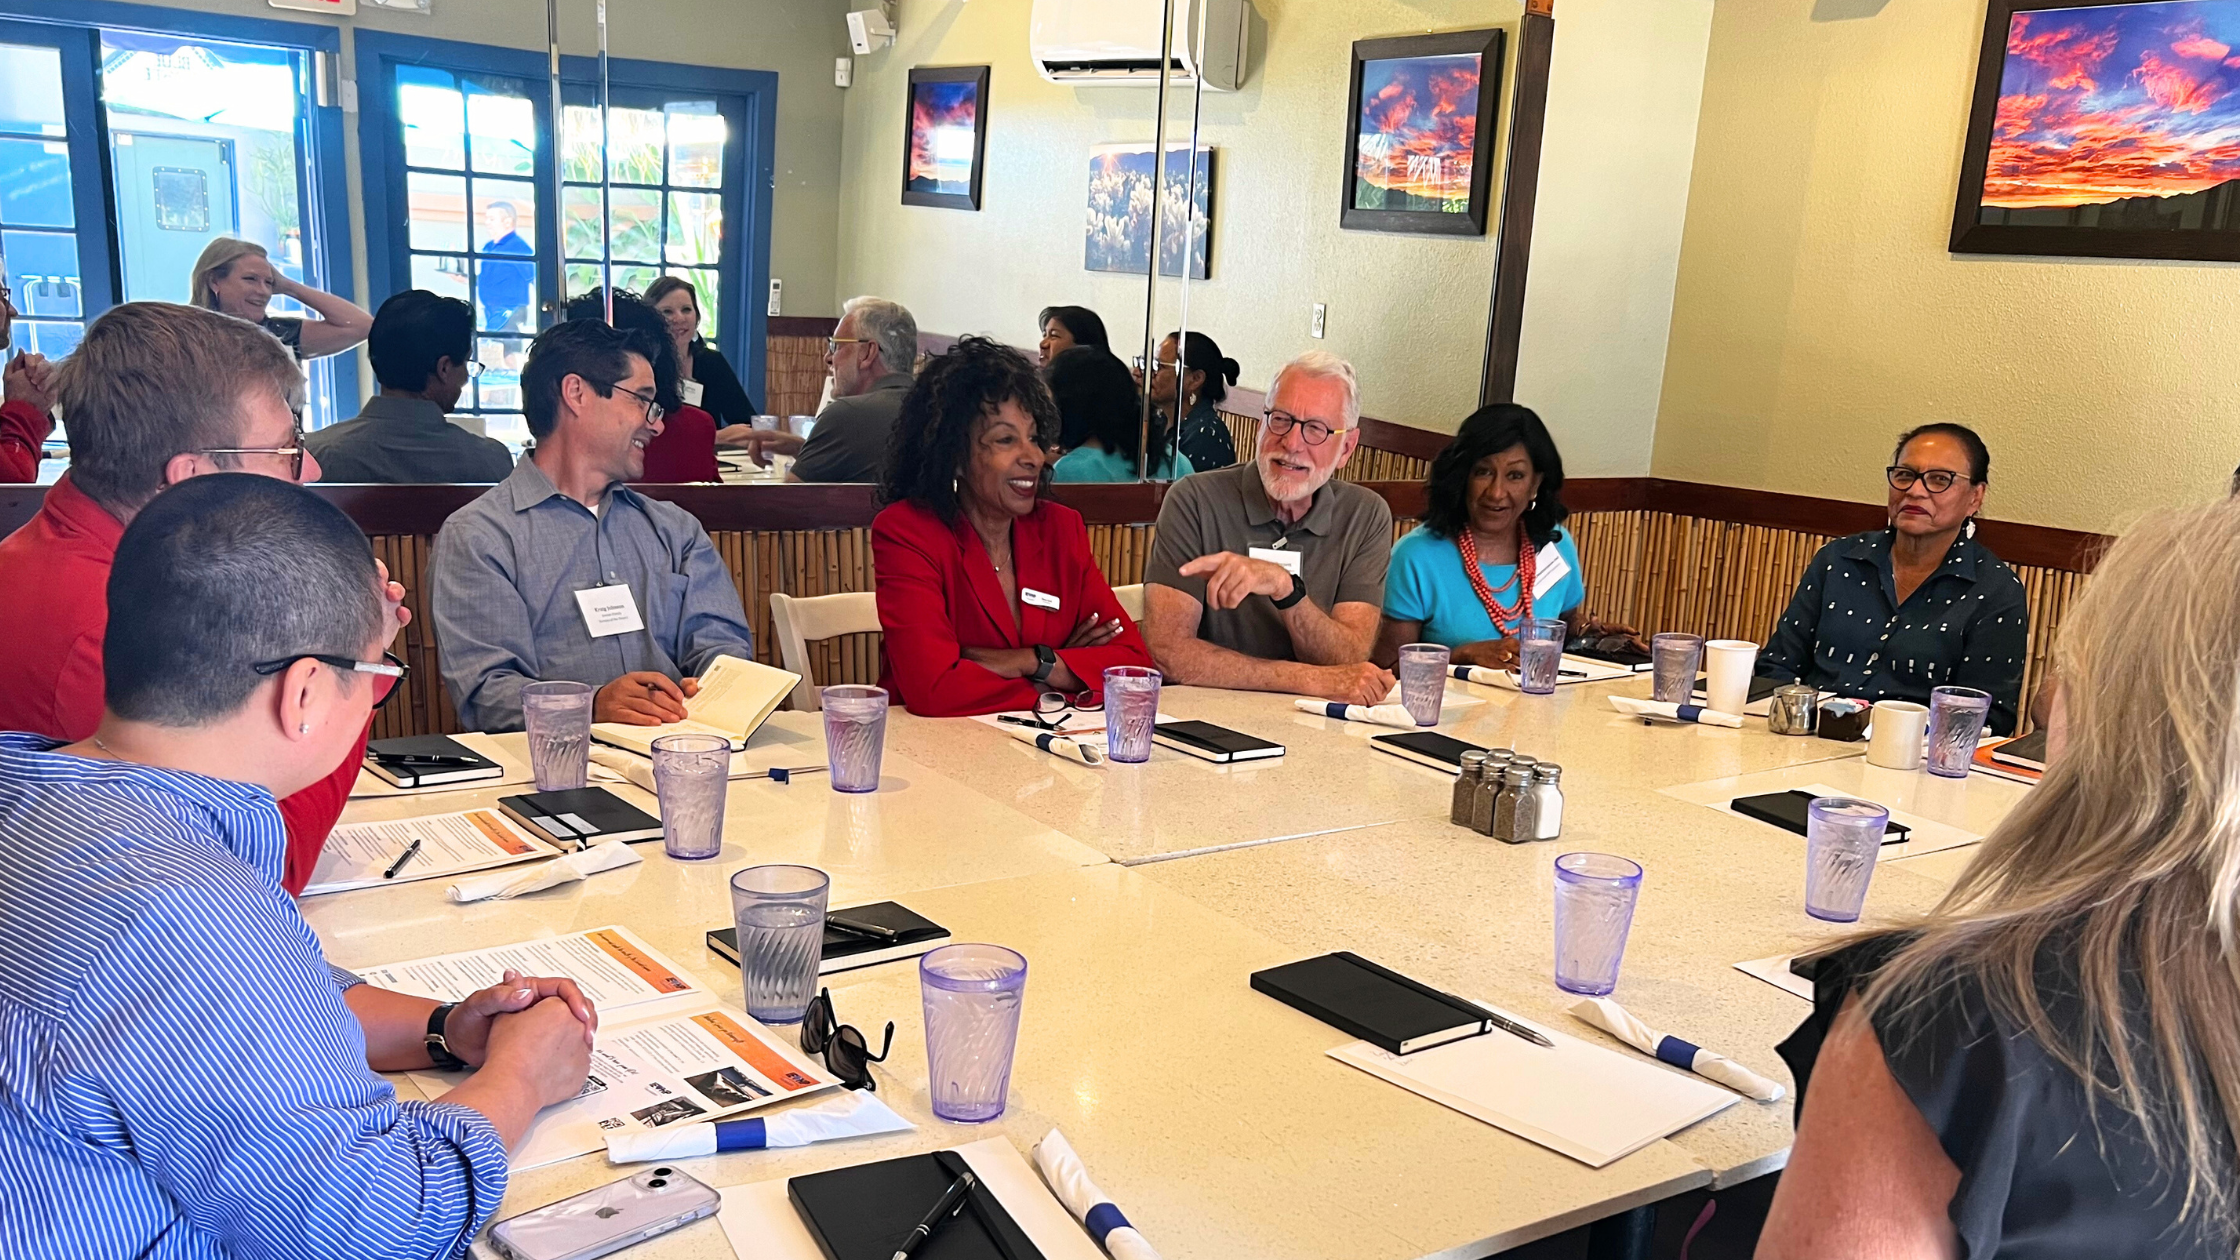 IEHP Foundation hosts community lunches to hear from the community